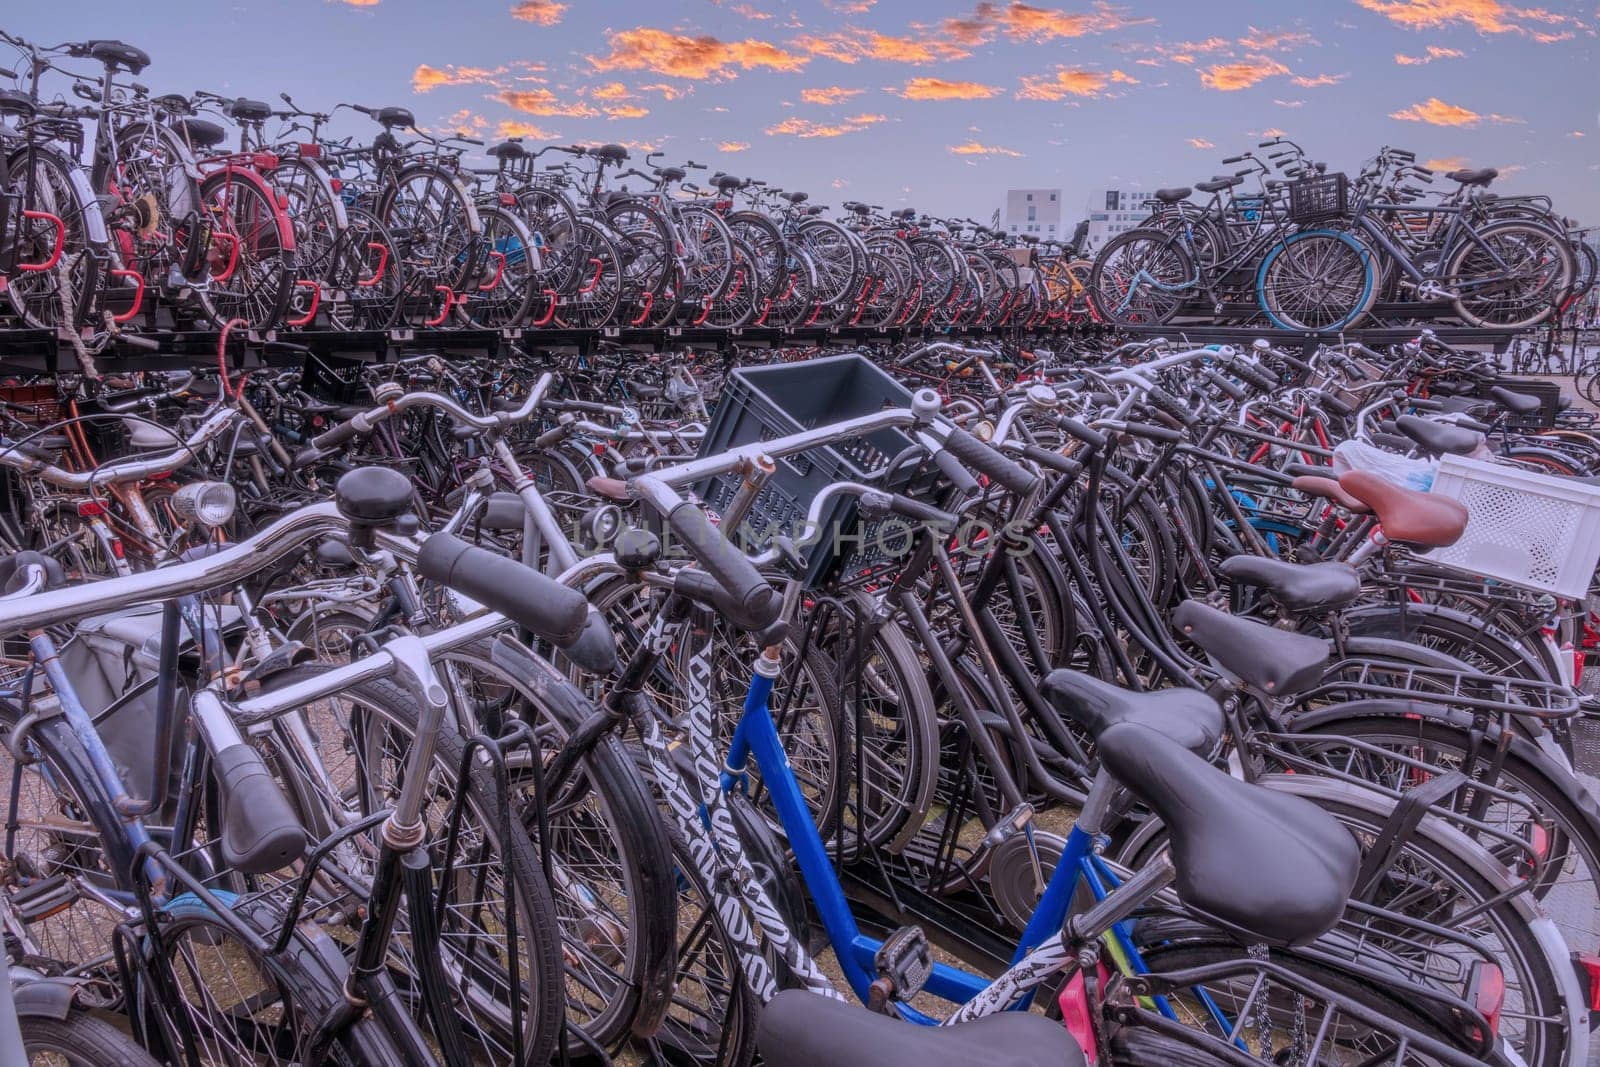 Large Bicycles Parking Lot and Sunset Sky in Amsterdam by Ruckzack